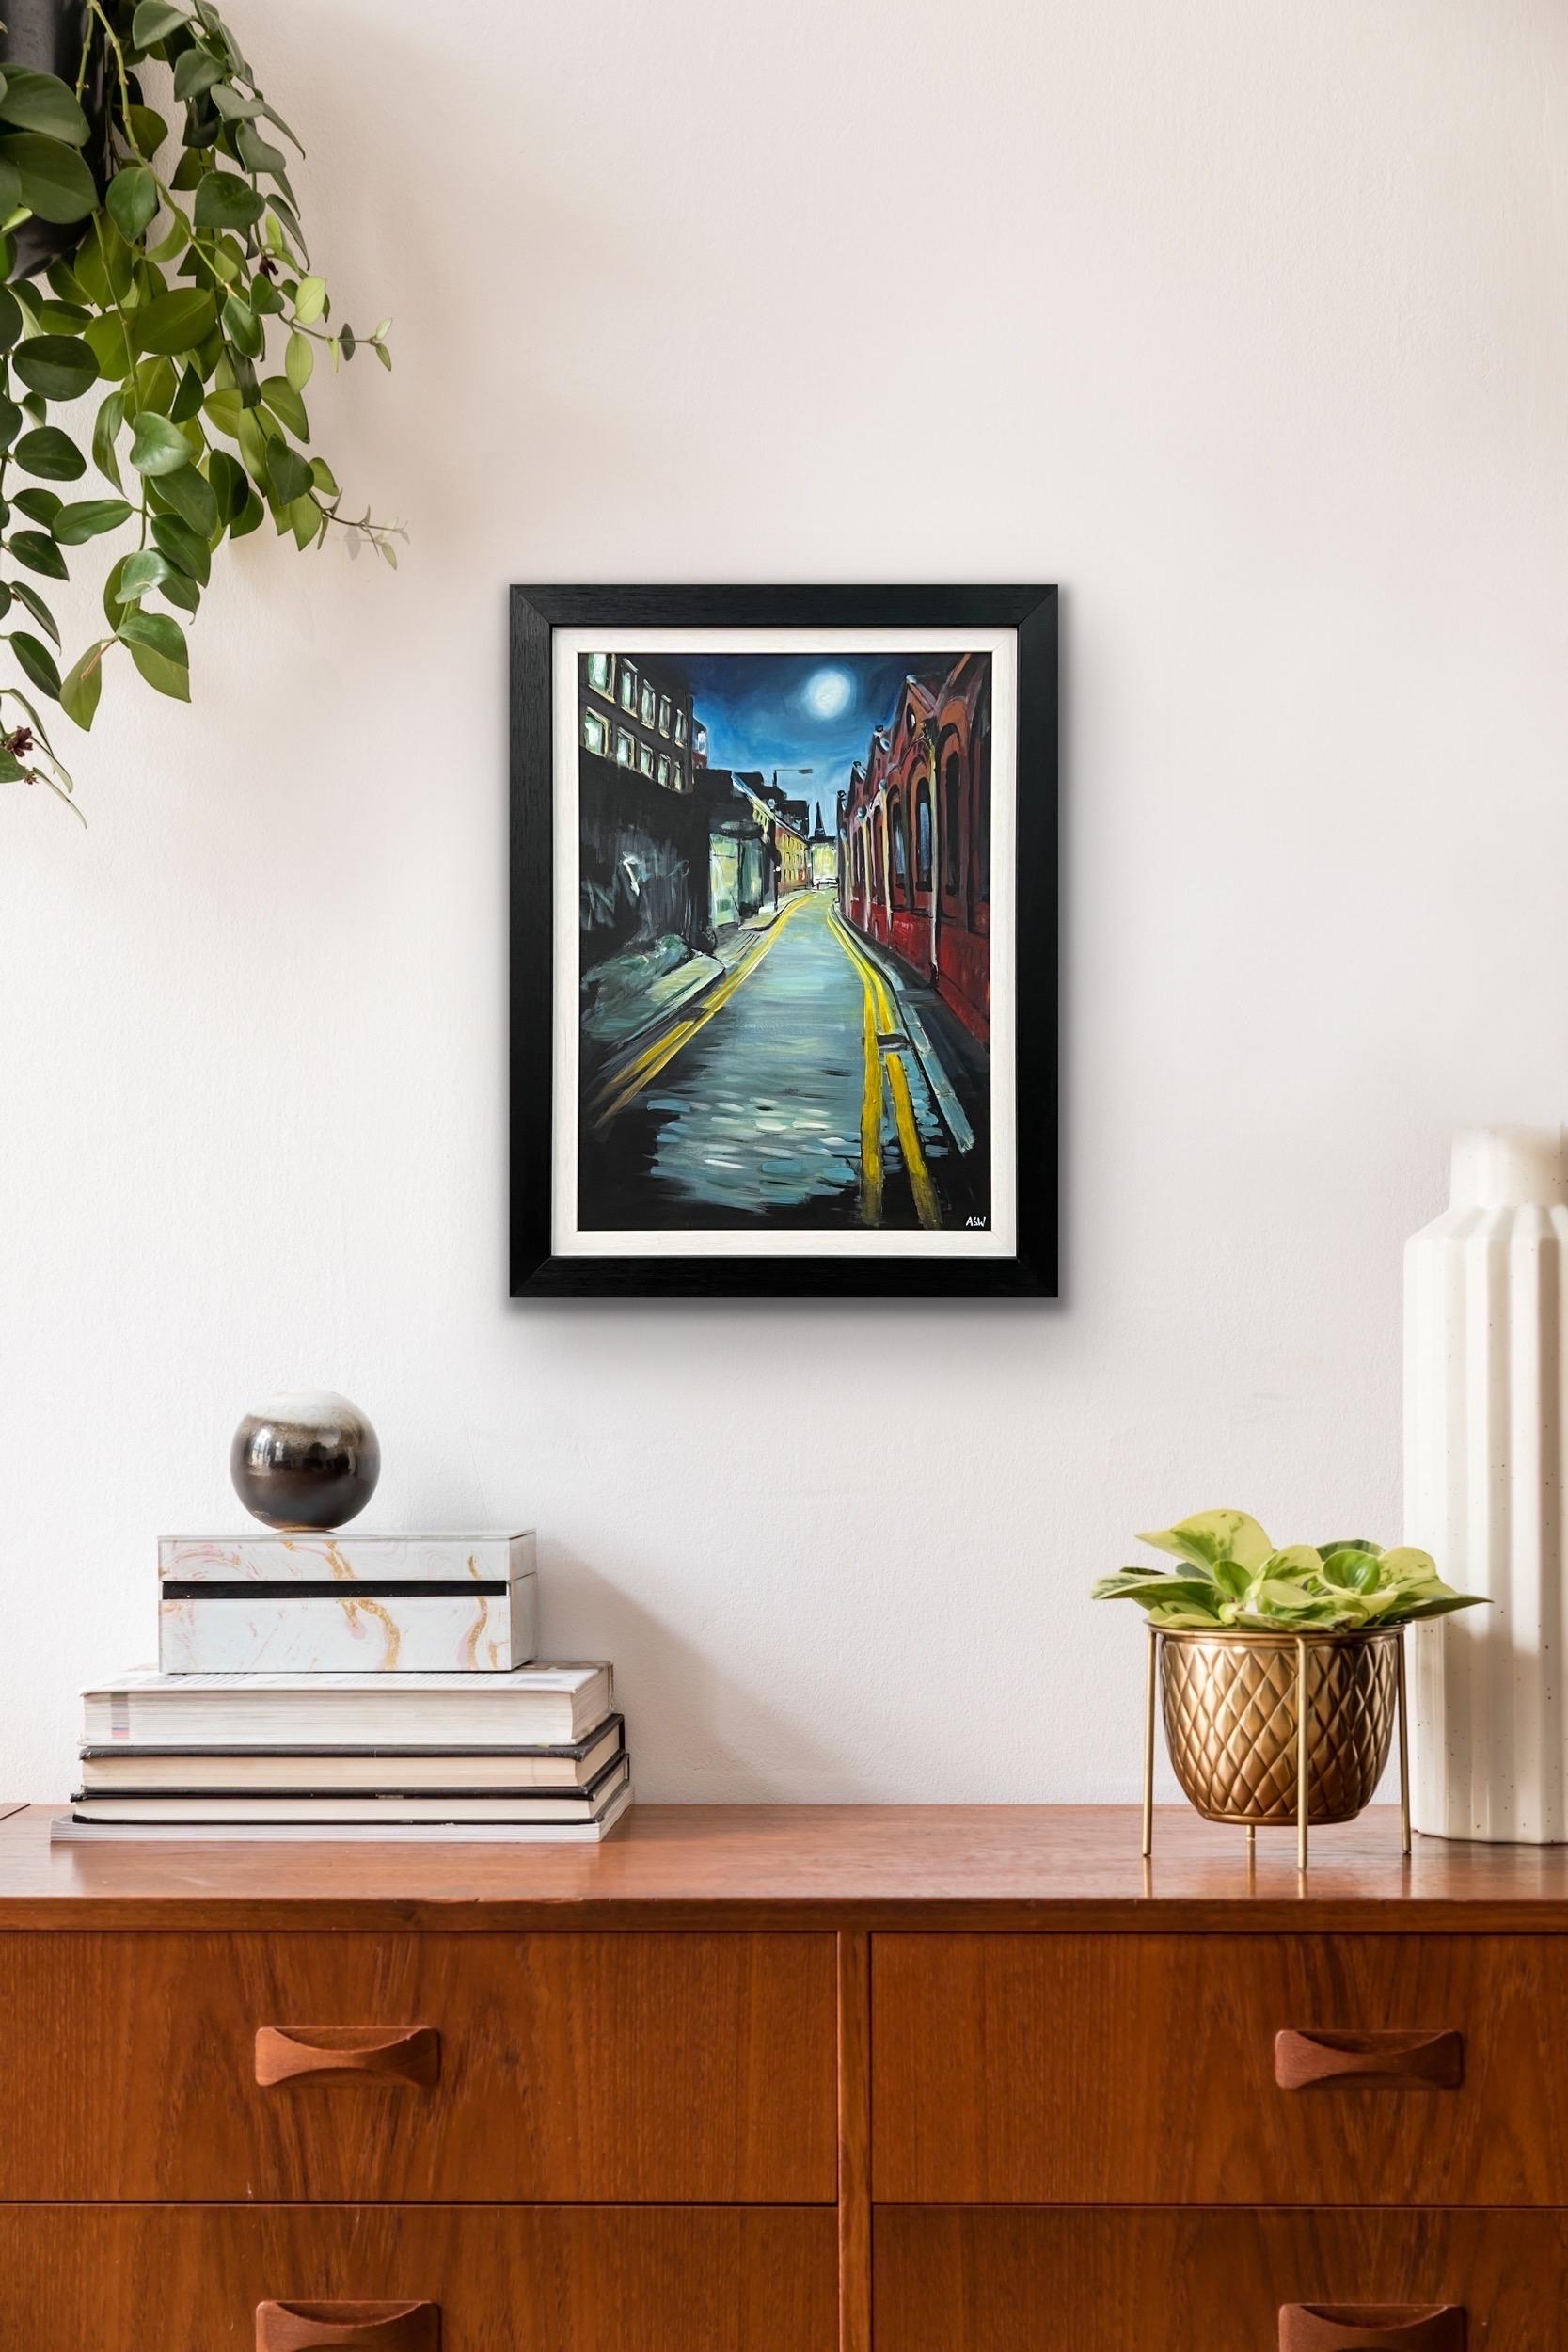 Atmospheric Painting of Street in Whitechapel London City by British Artist - English School Mixed Media Art by Angela Wakefield